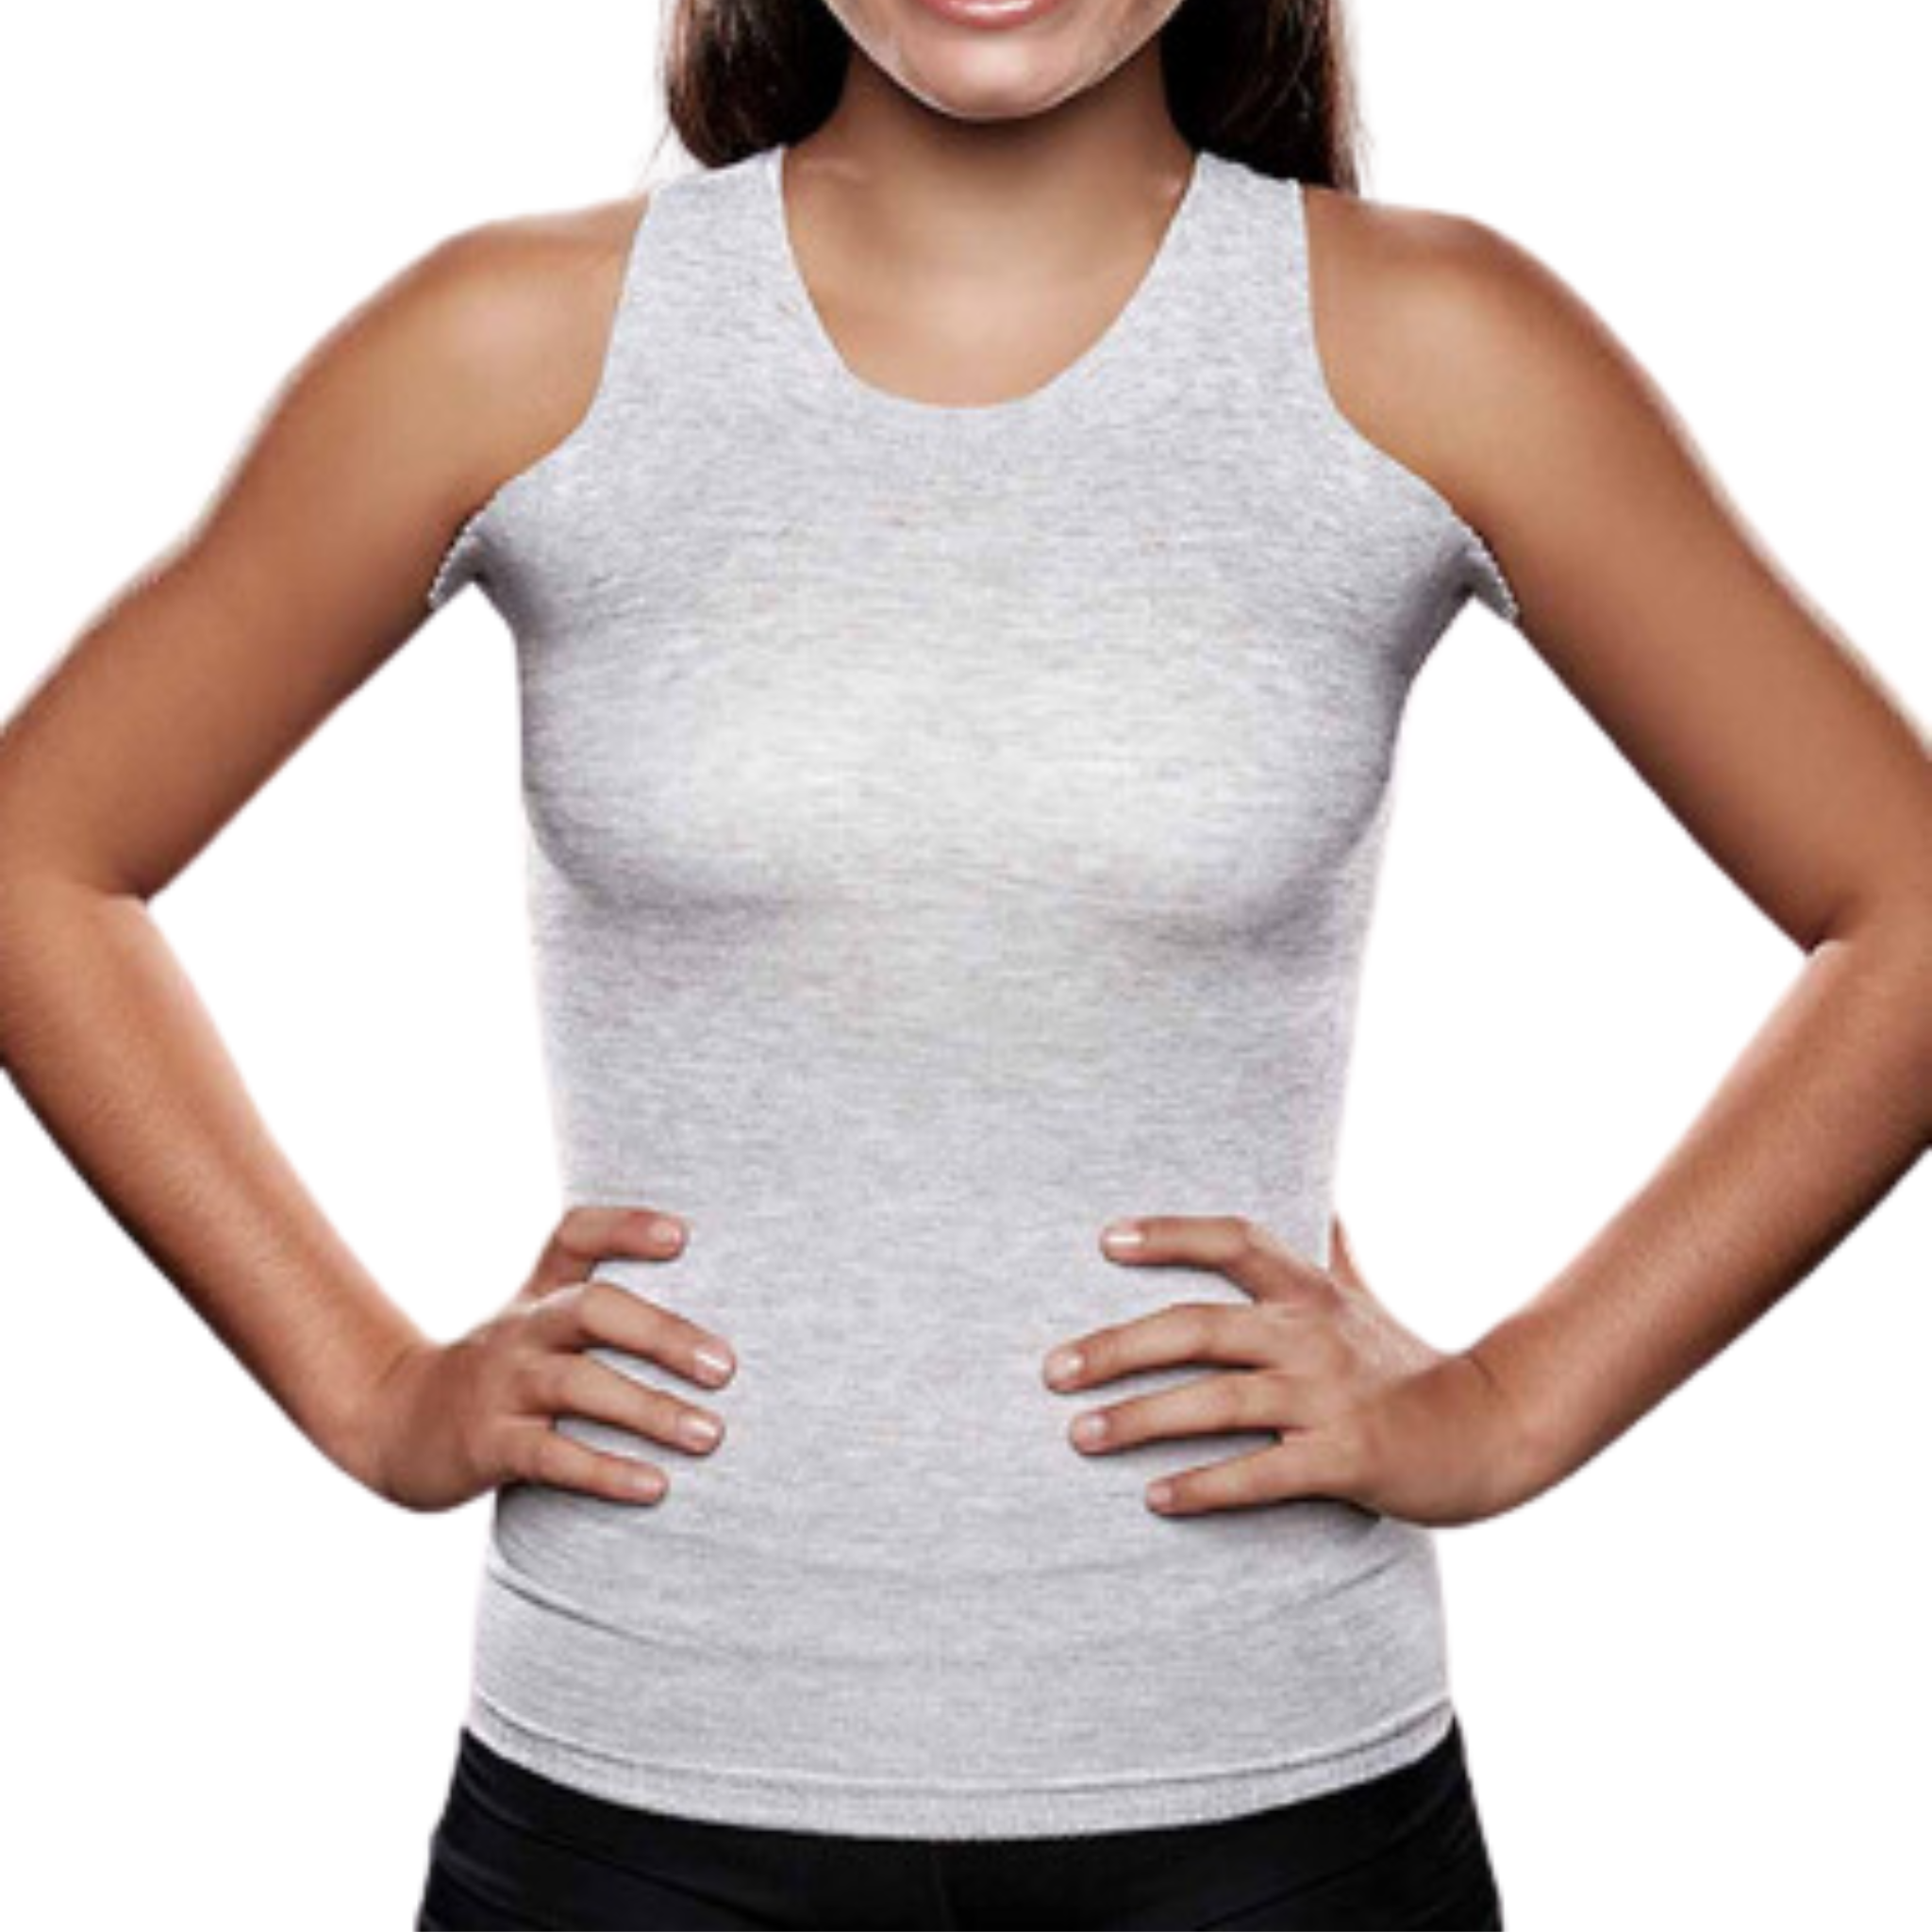 Knit-Rite - Lightweight Unisex Seamless Vest Torso Interface for Brace- V-Neck with Double Axilla Flaps